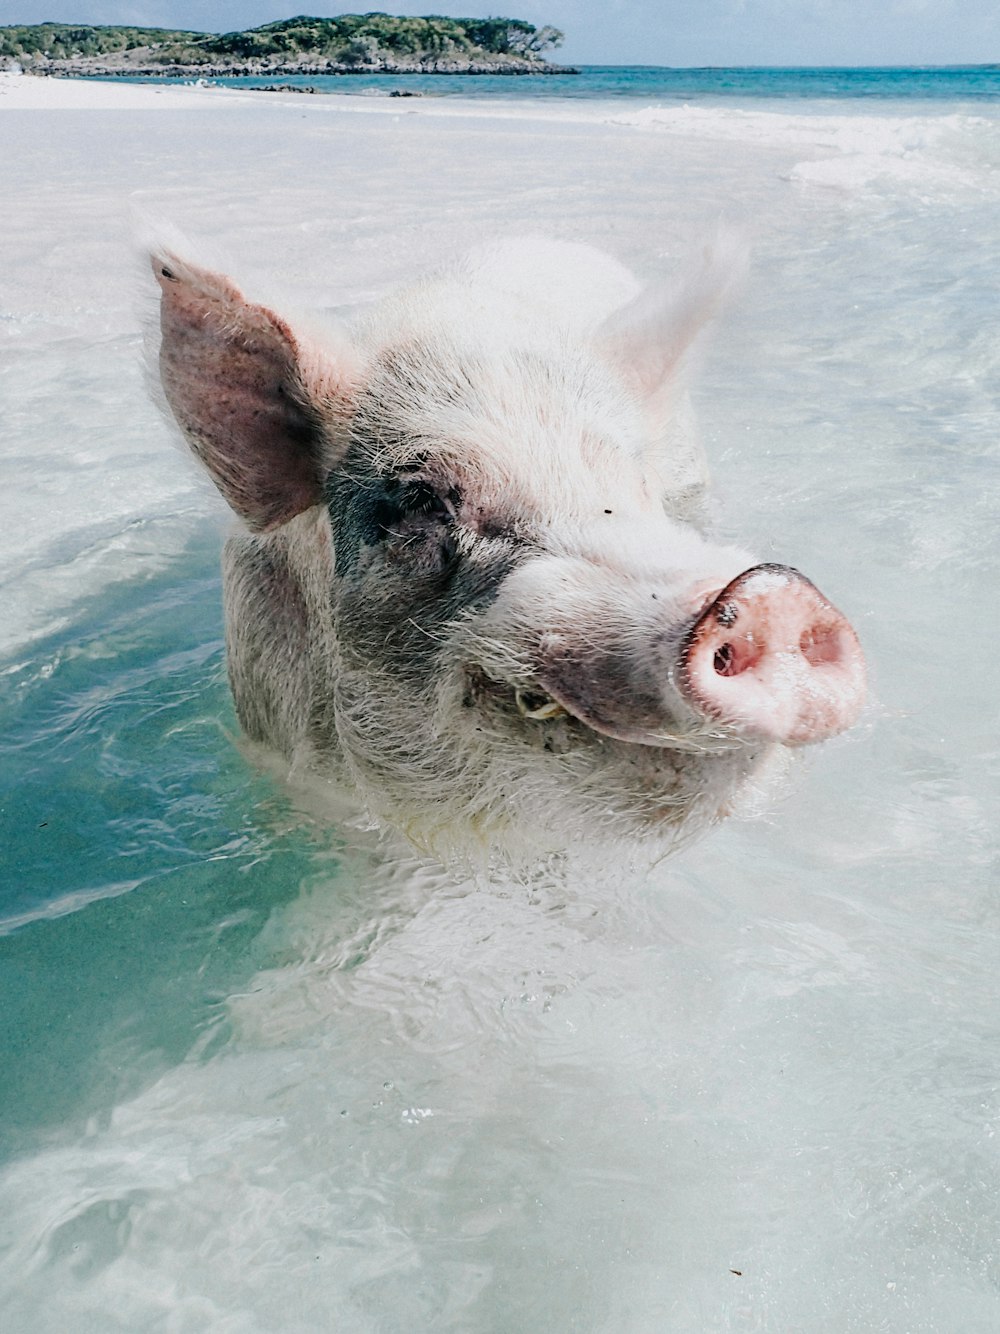 white pig in water during daytime